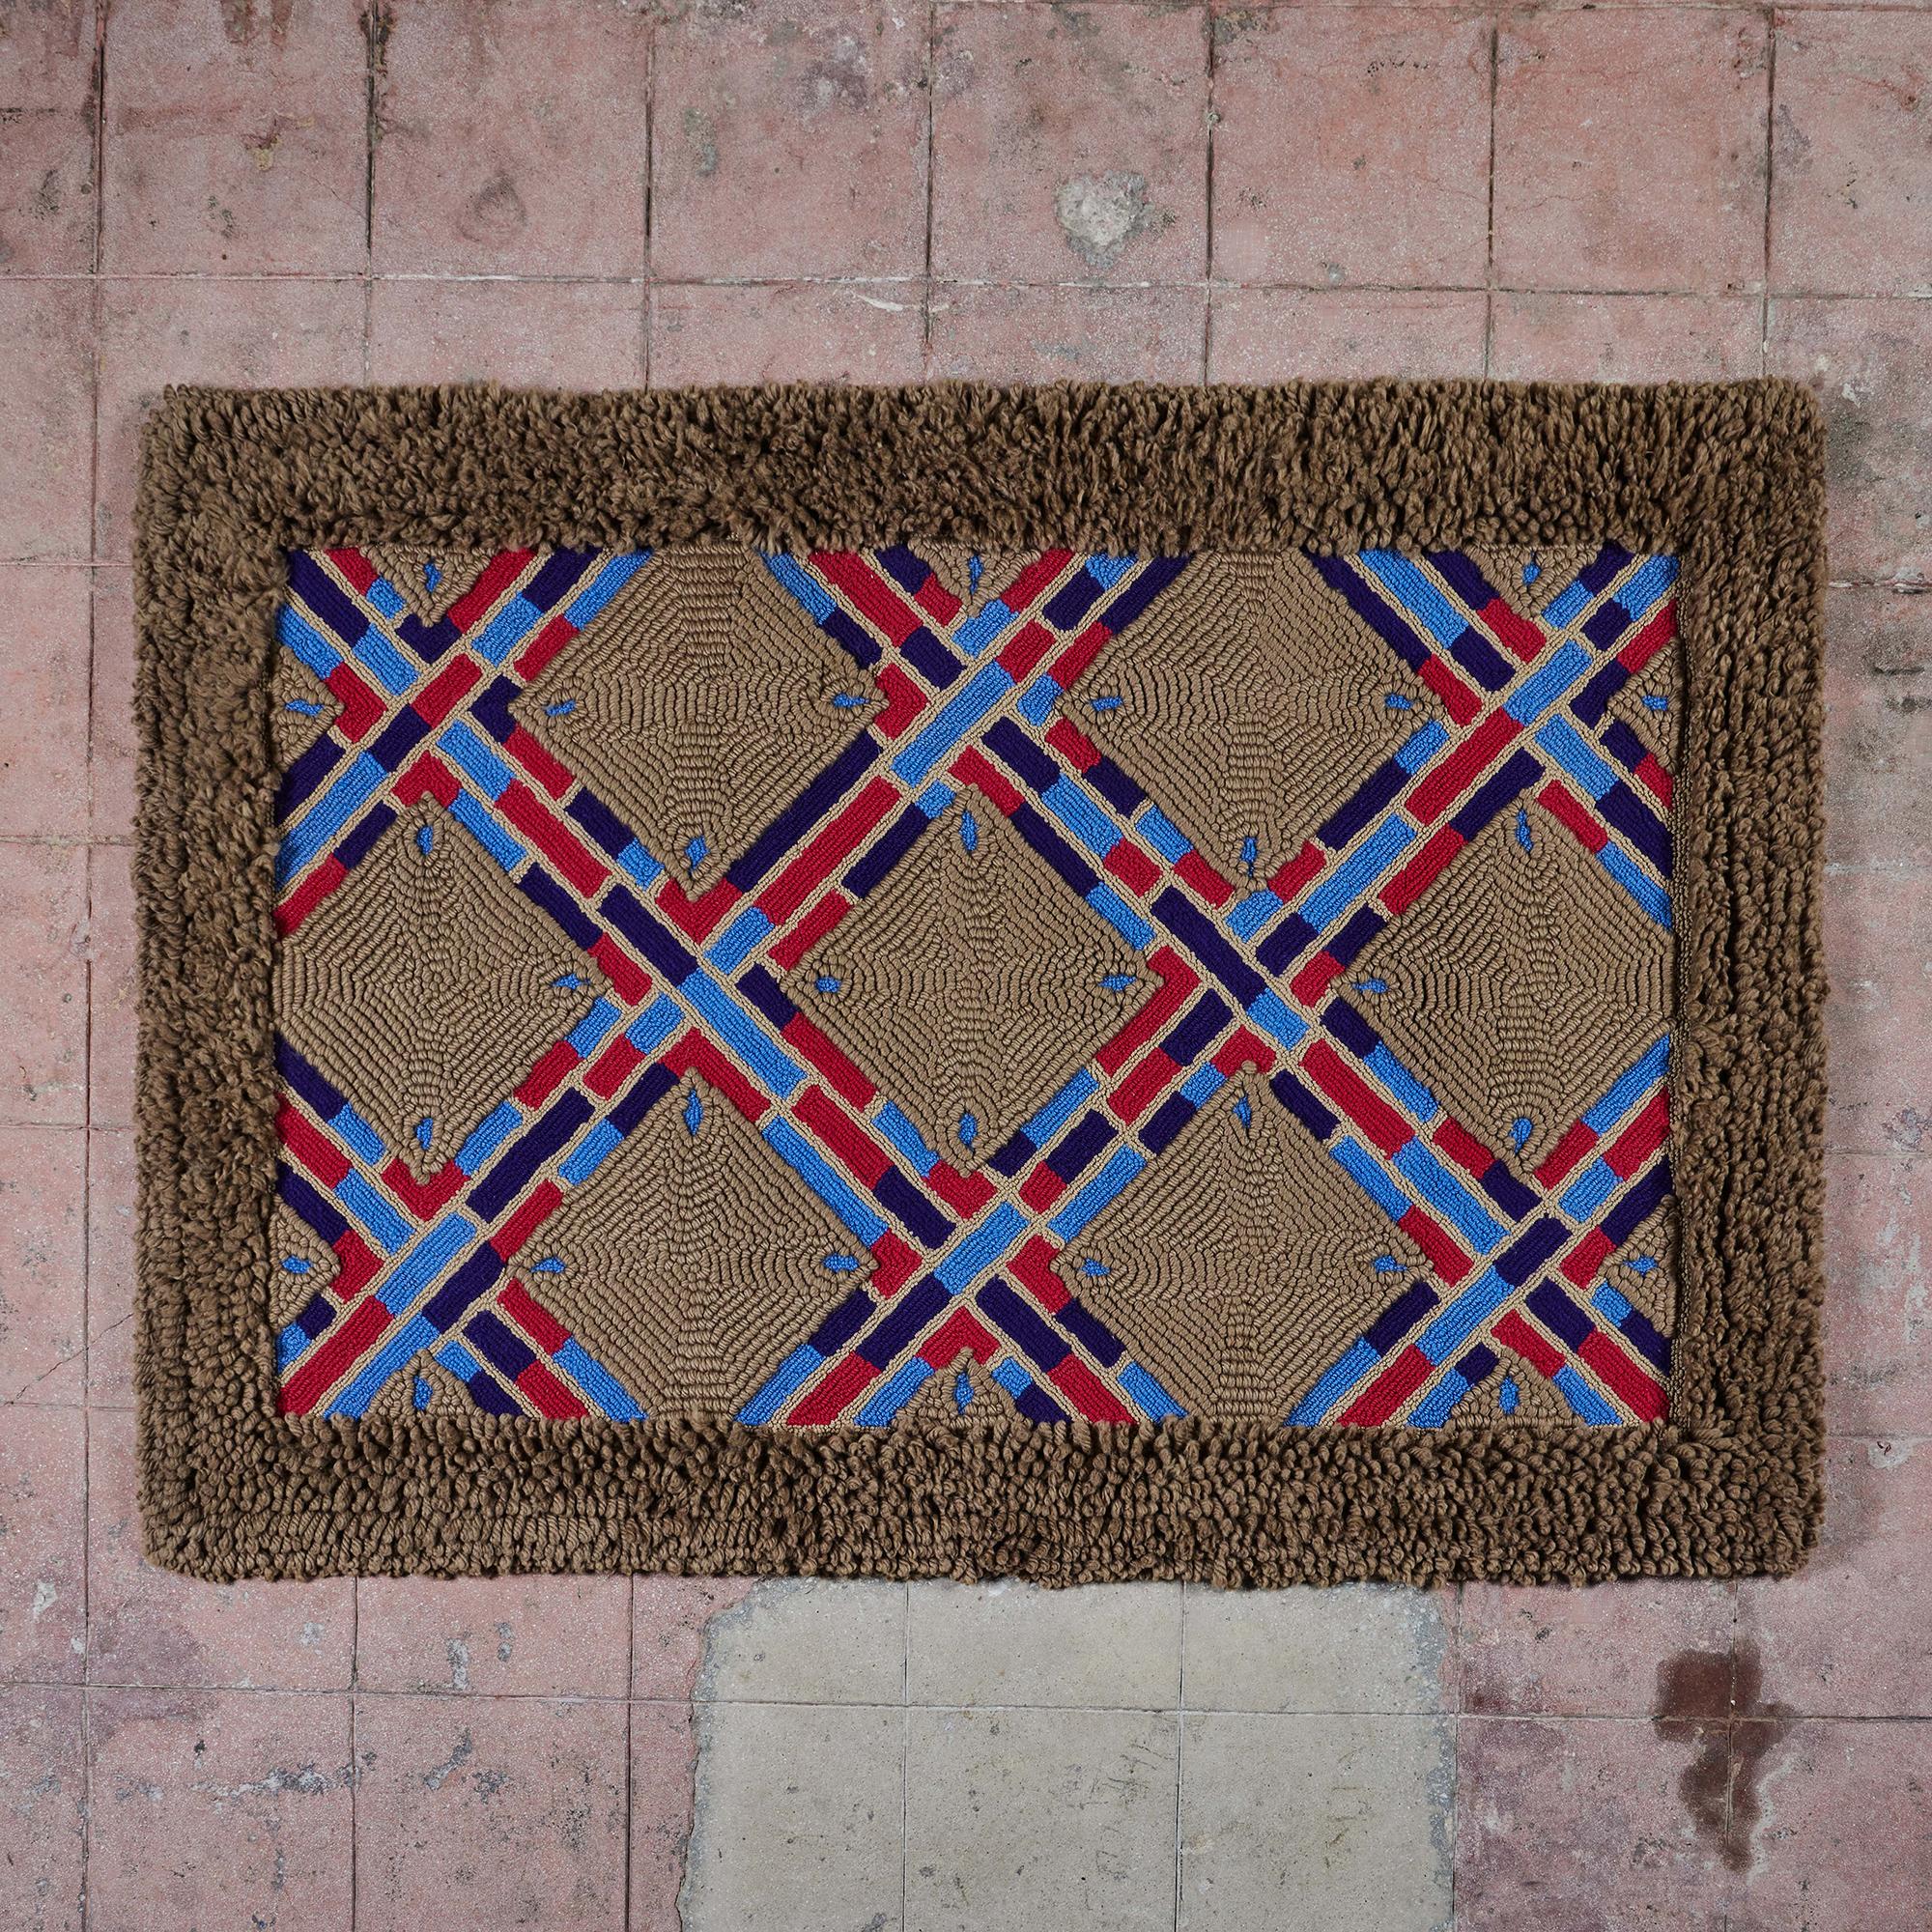 Rectangular rug made of hand-looped wool. It features a geometric pattern of diamonds and rectangles in tan, blue, red and black. The rug is outlined in a high pile tan shag wool.

Dimensions
73